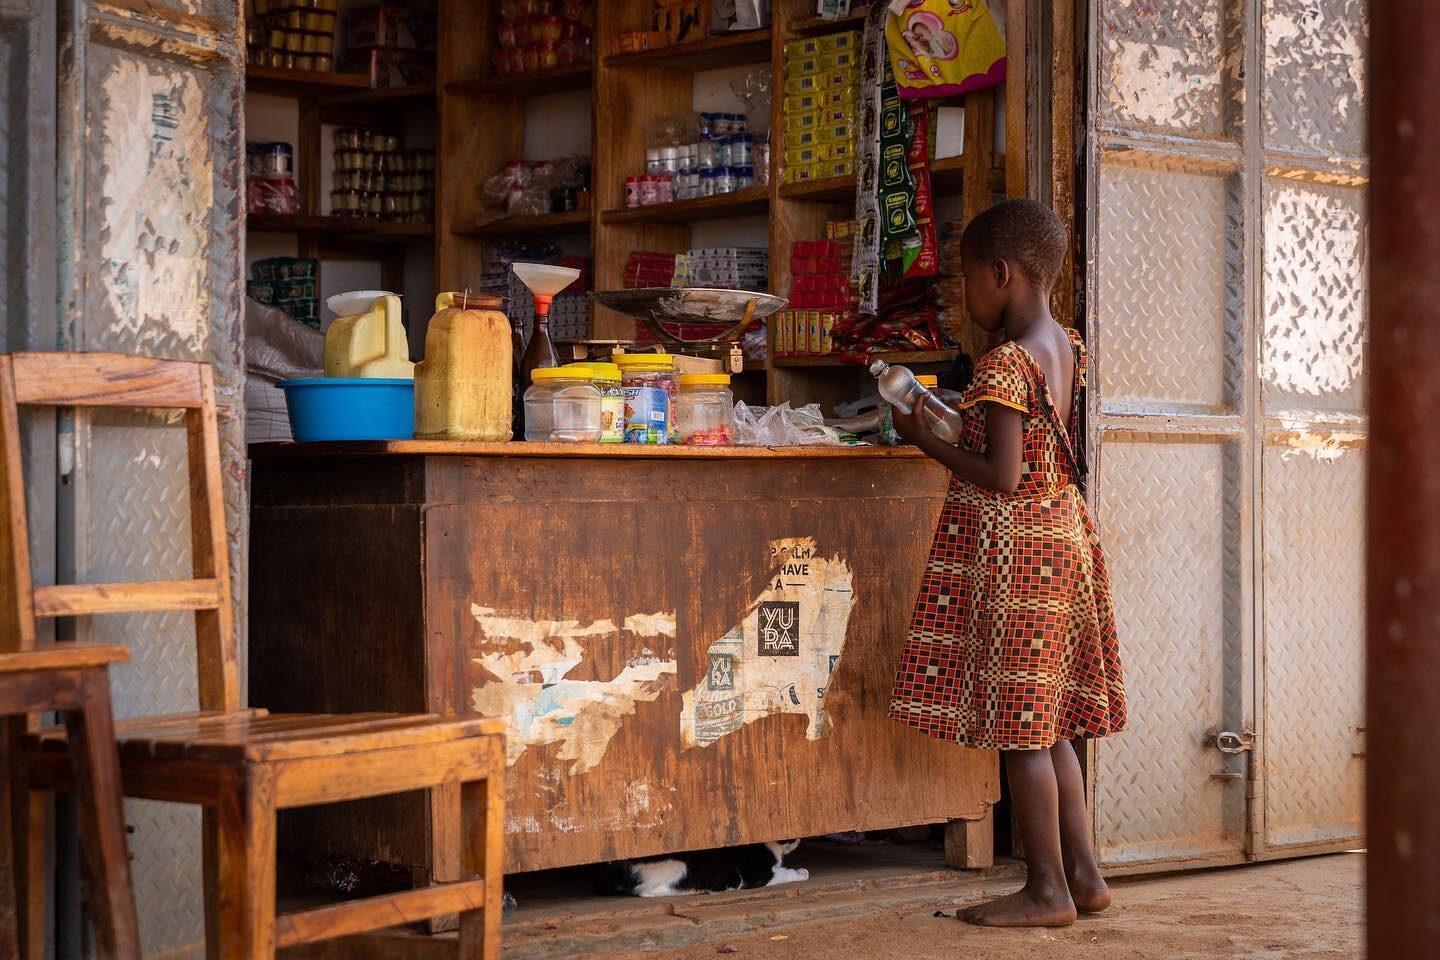 This young girl was buying oil from a local shop. She brought her own containers and the the shop keeper filled them from his stock, using funnels to avoid spills.
.
.
.
#musolivillage #mayuge #uganda